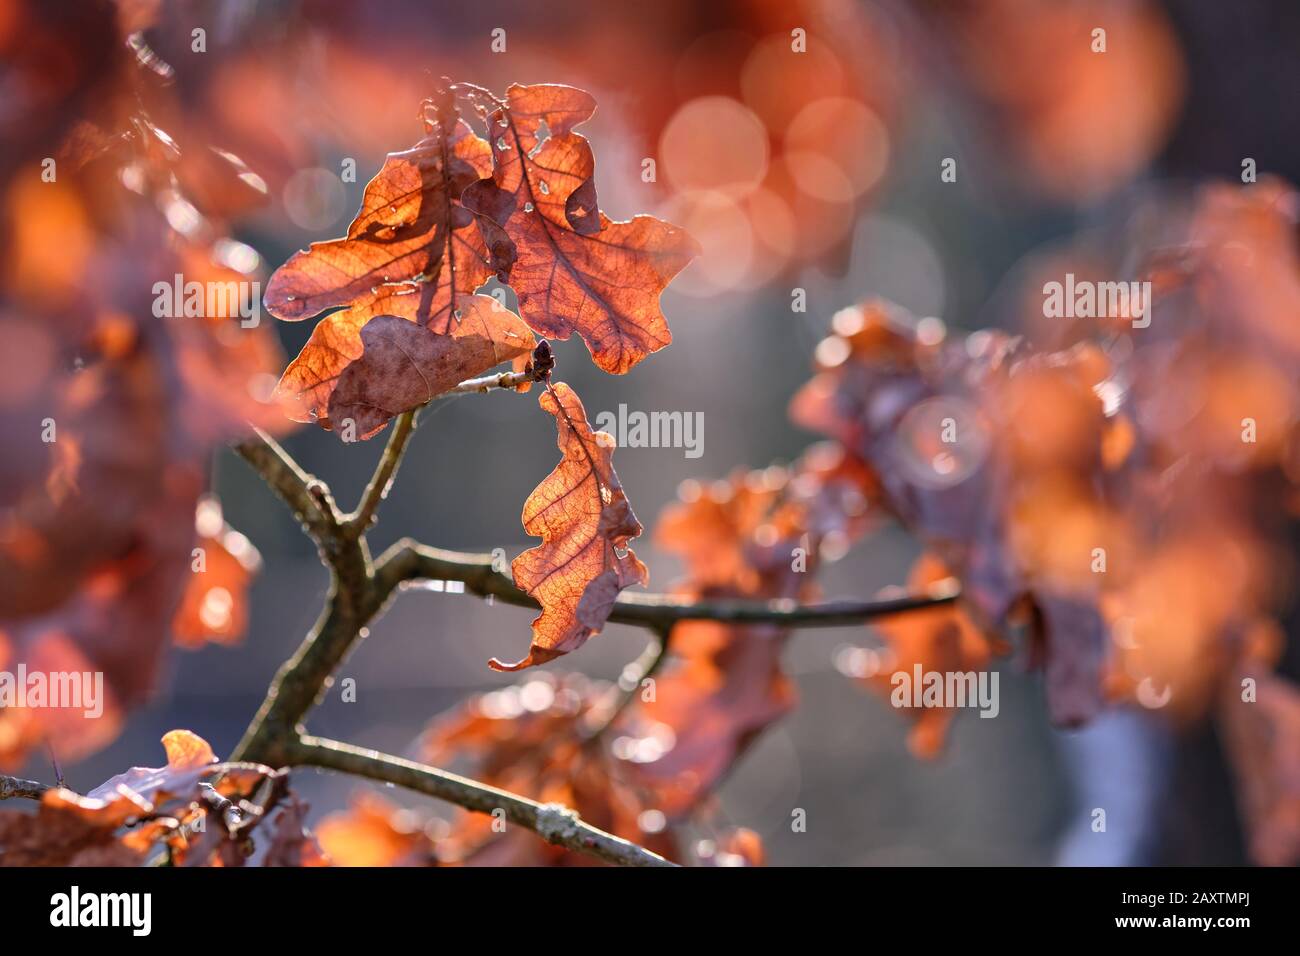 Beautiful close-up of dry and wrinkled brown autumn leaves of an oak tree in the sunlight. Seen in Germany in February Stock Photo